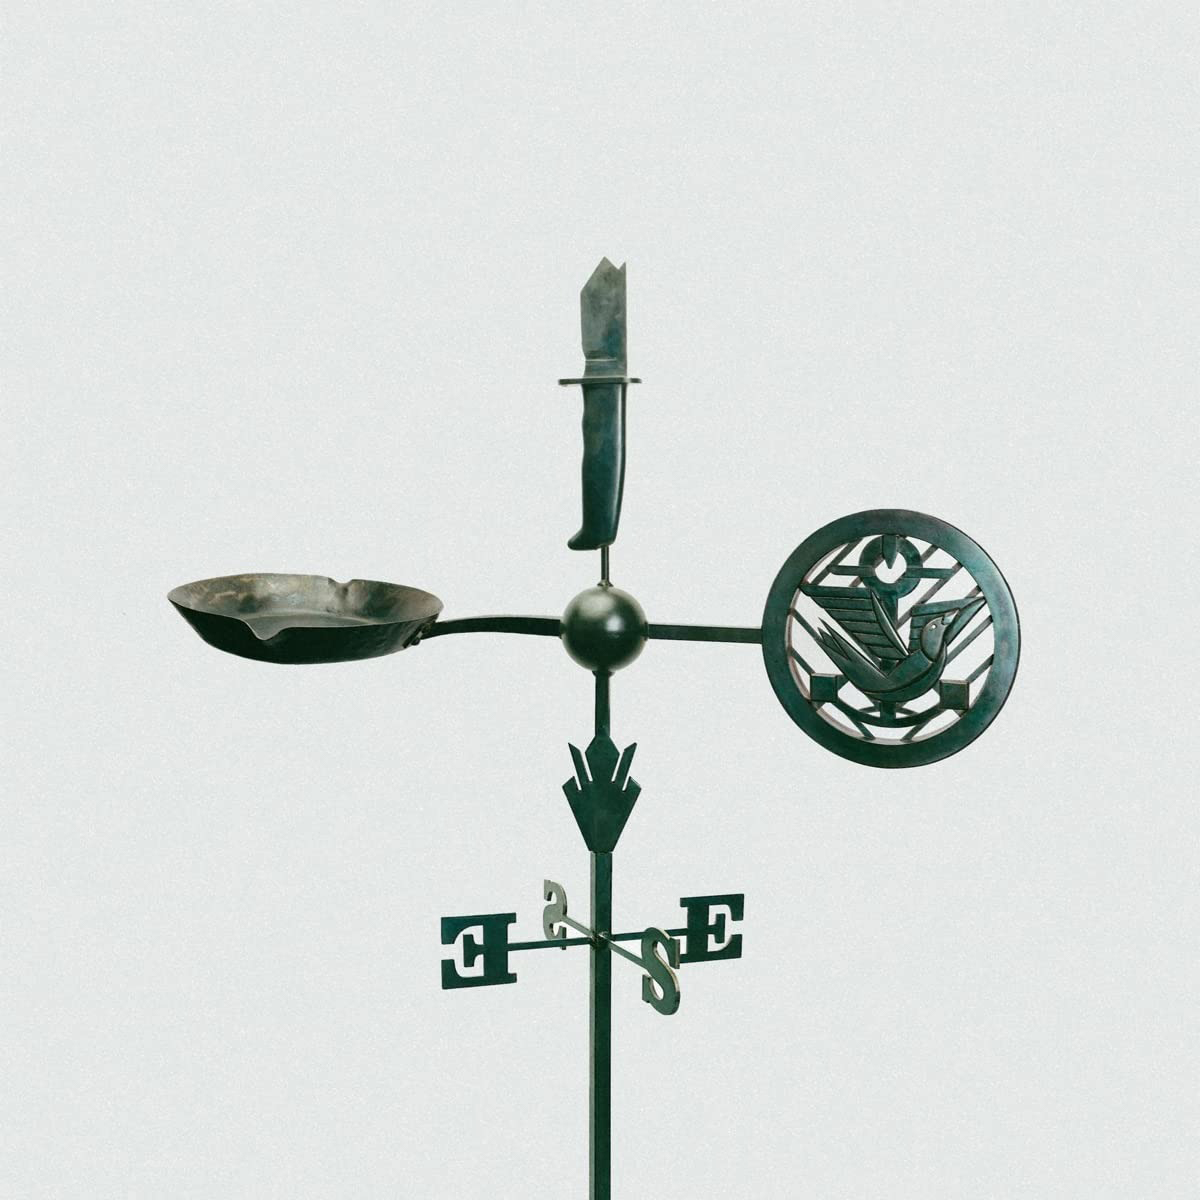 Weathervanes by Jason Isbell and the 400 Unit